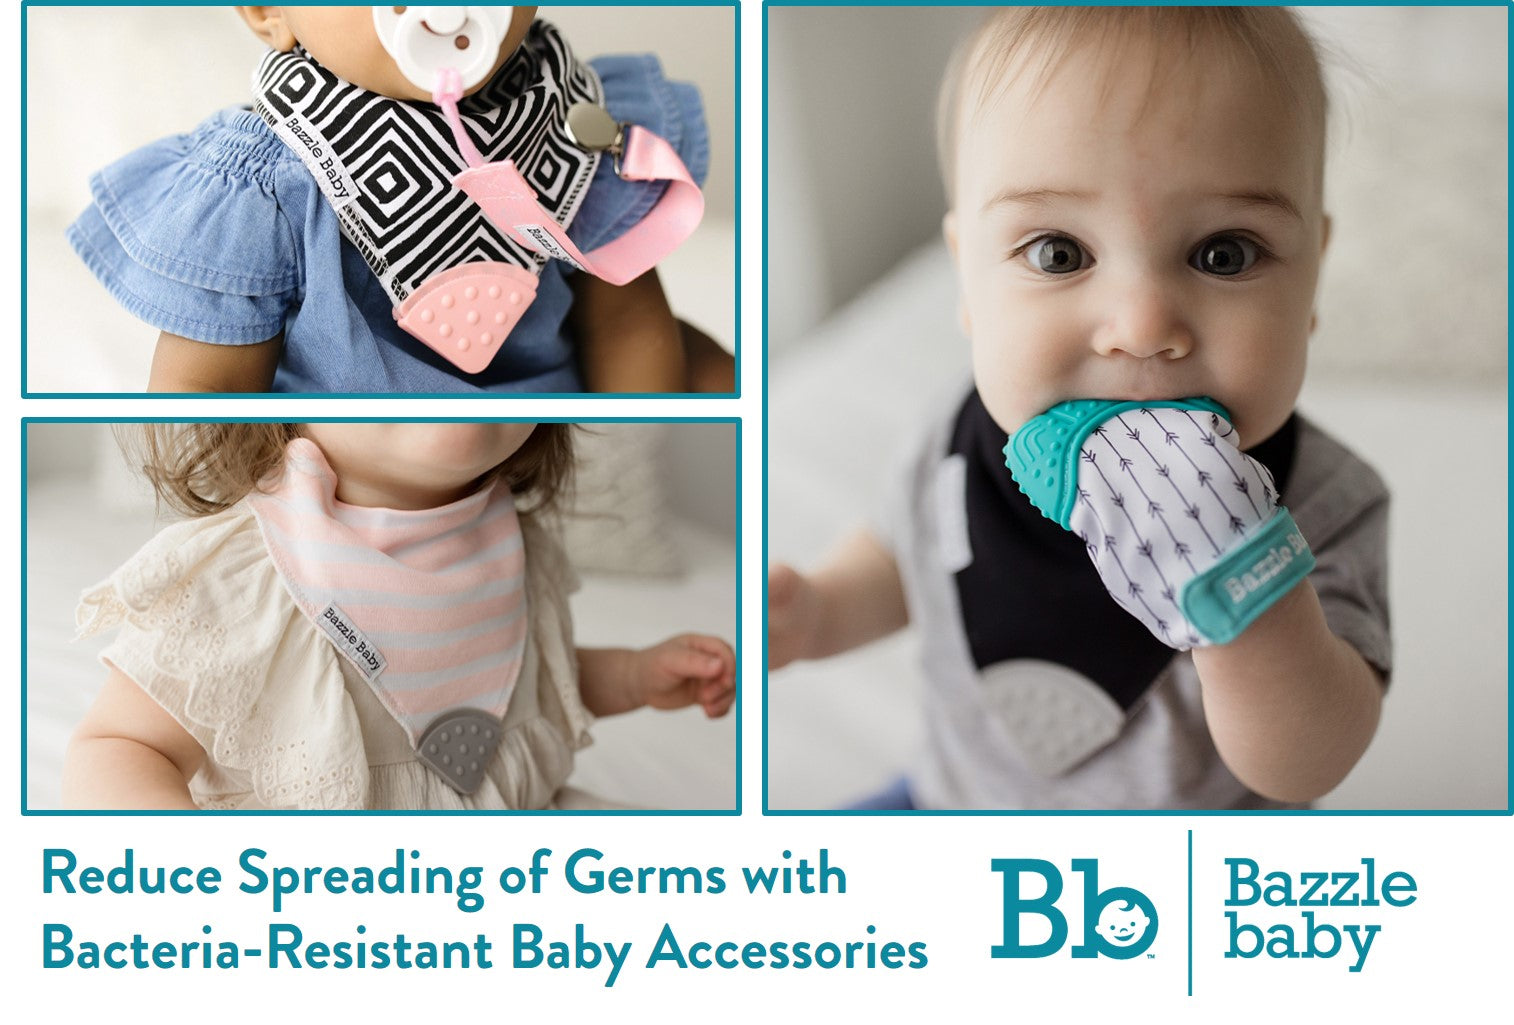 Bacteria-Resistant Baby Accessories to Reduce Spreading of Germs